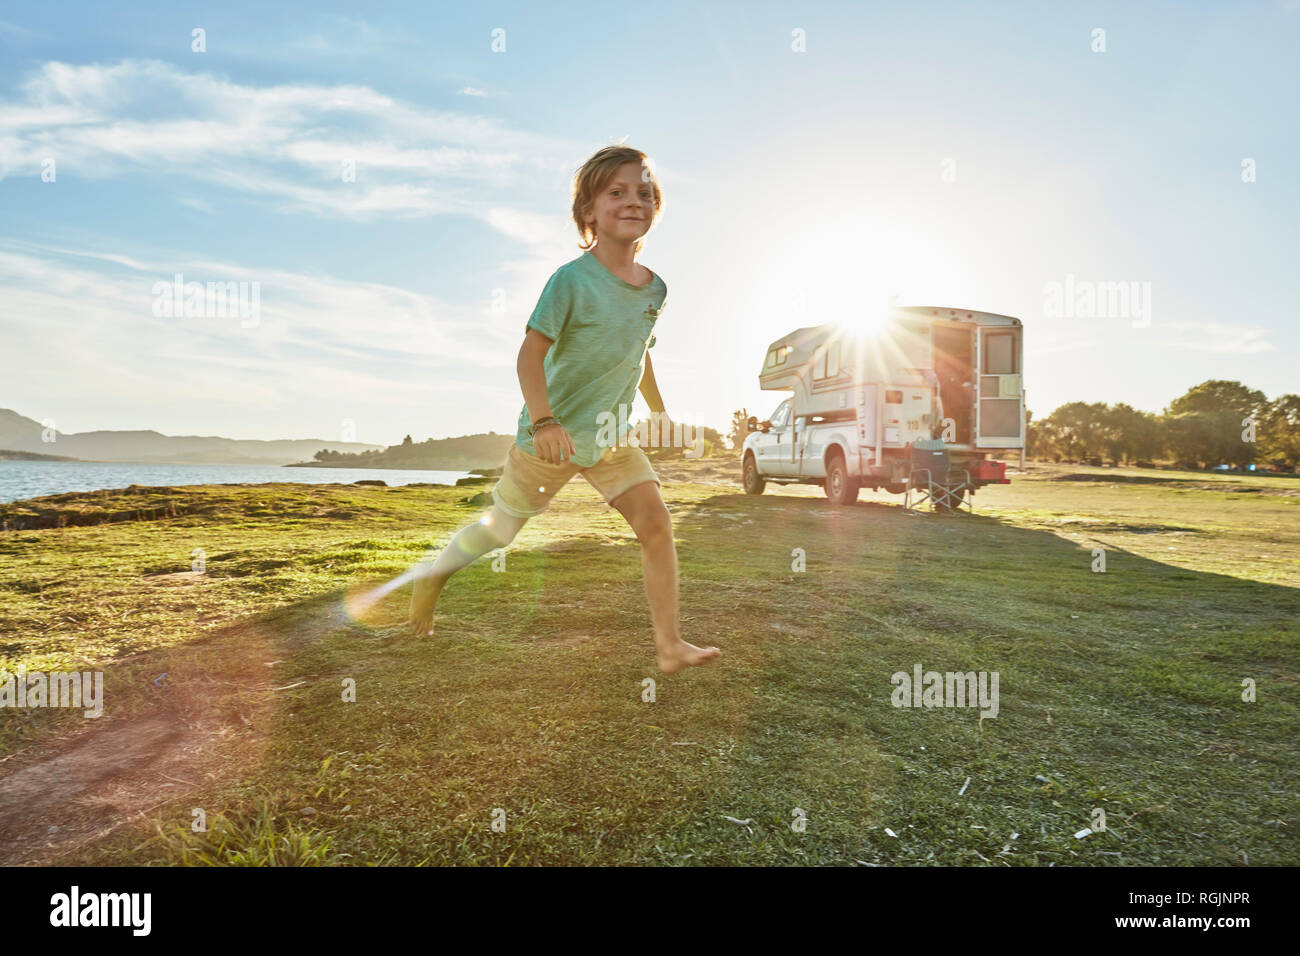 Chile, Talca, Rio Maule, boy running on meadowbeside camper at lake Stock Photo